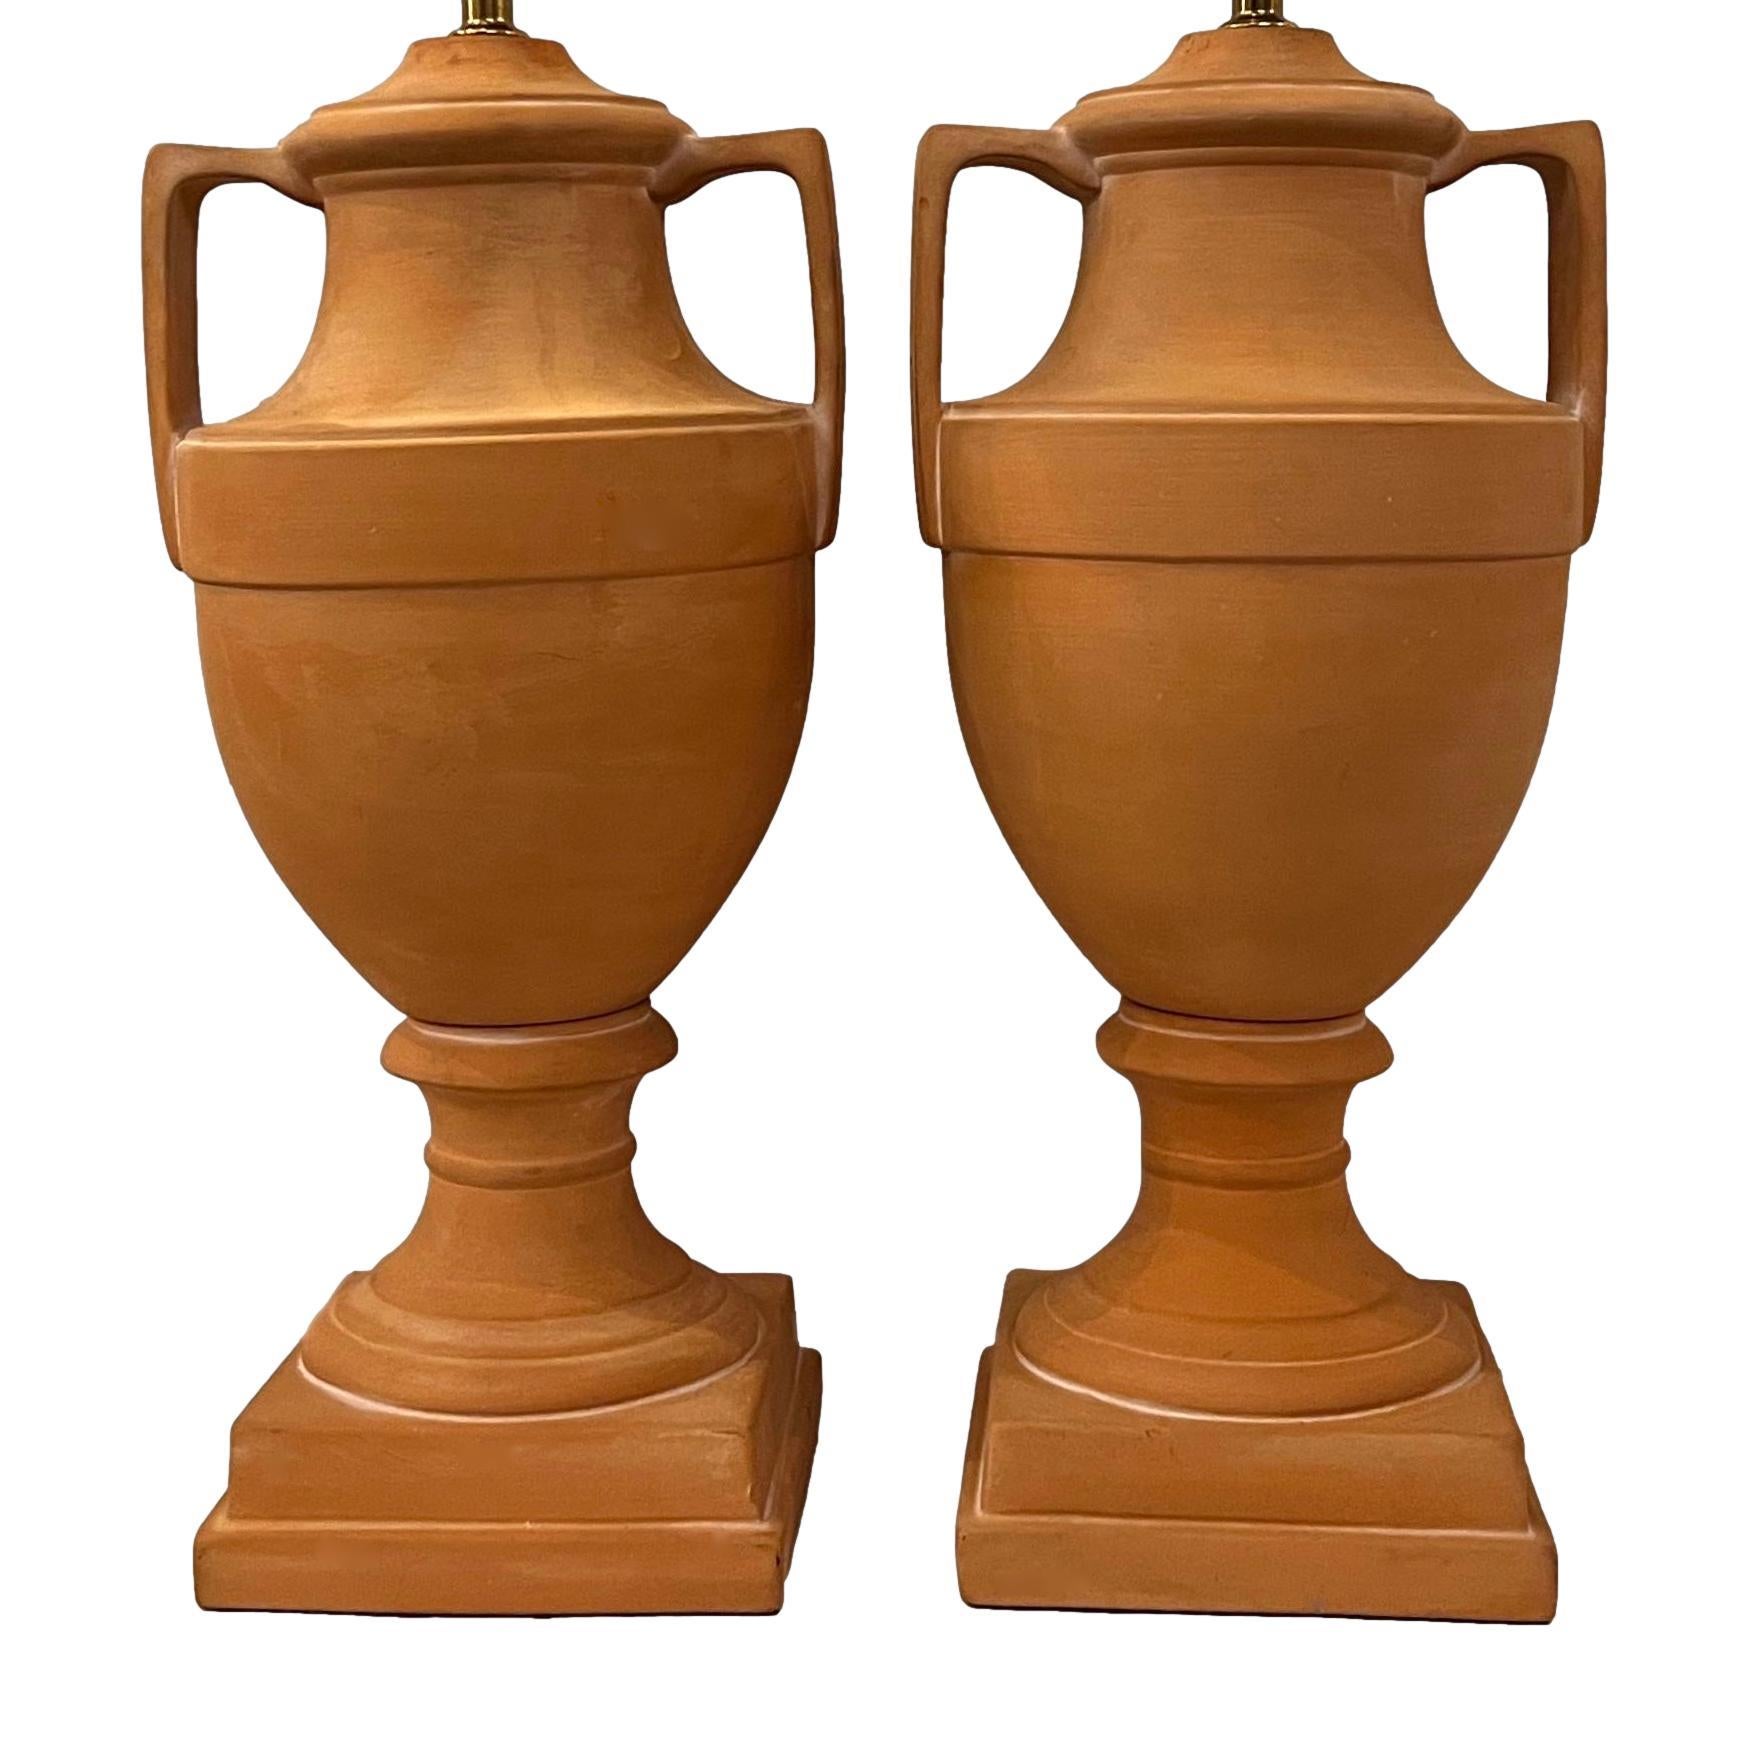 A pair of circa 1950's French unglazed terracotta urn-shaped table lamps.

Measurements:
Height of body: 19